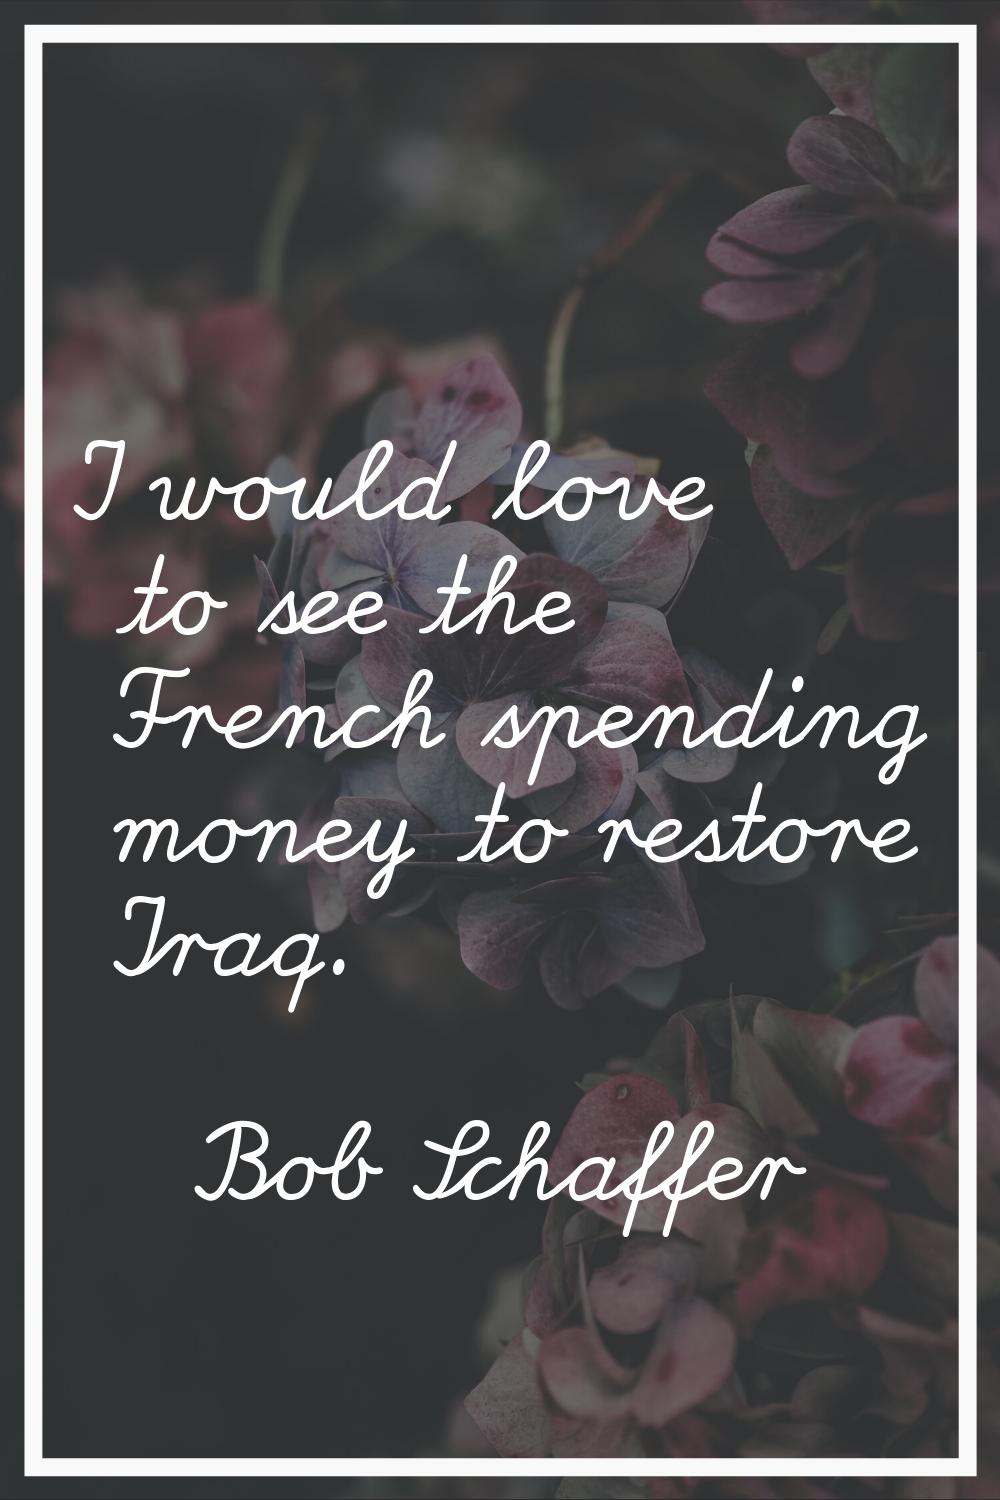 I would love to see the French spending money to restore Iraq.